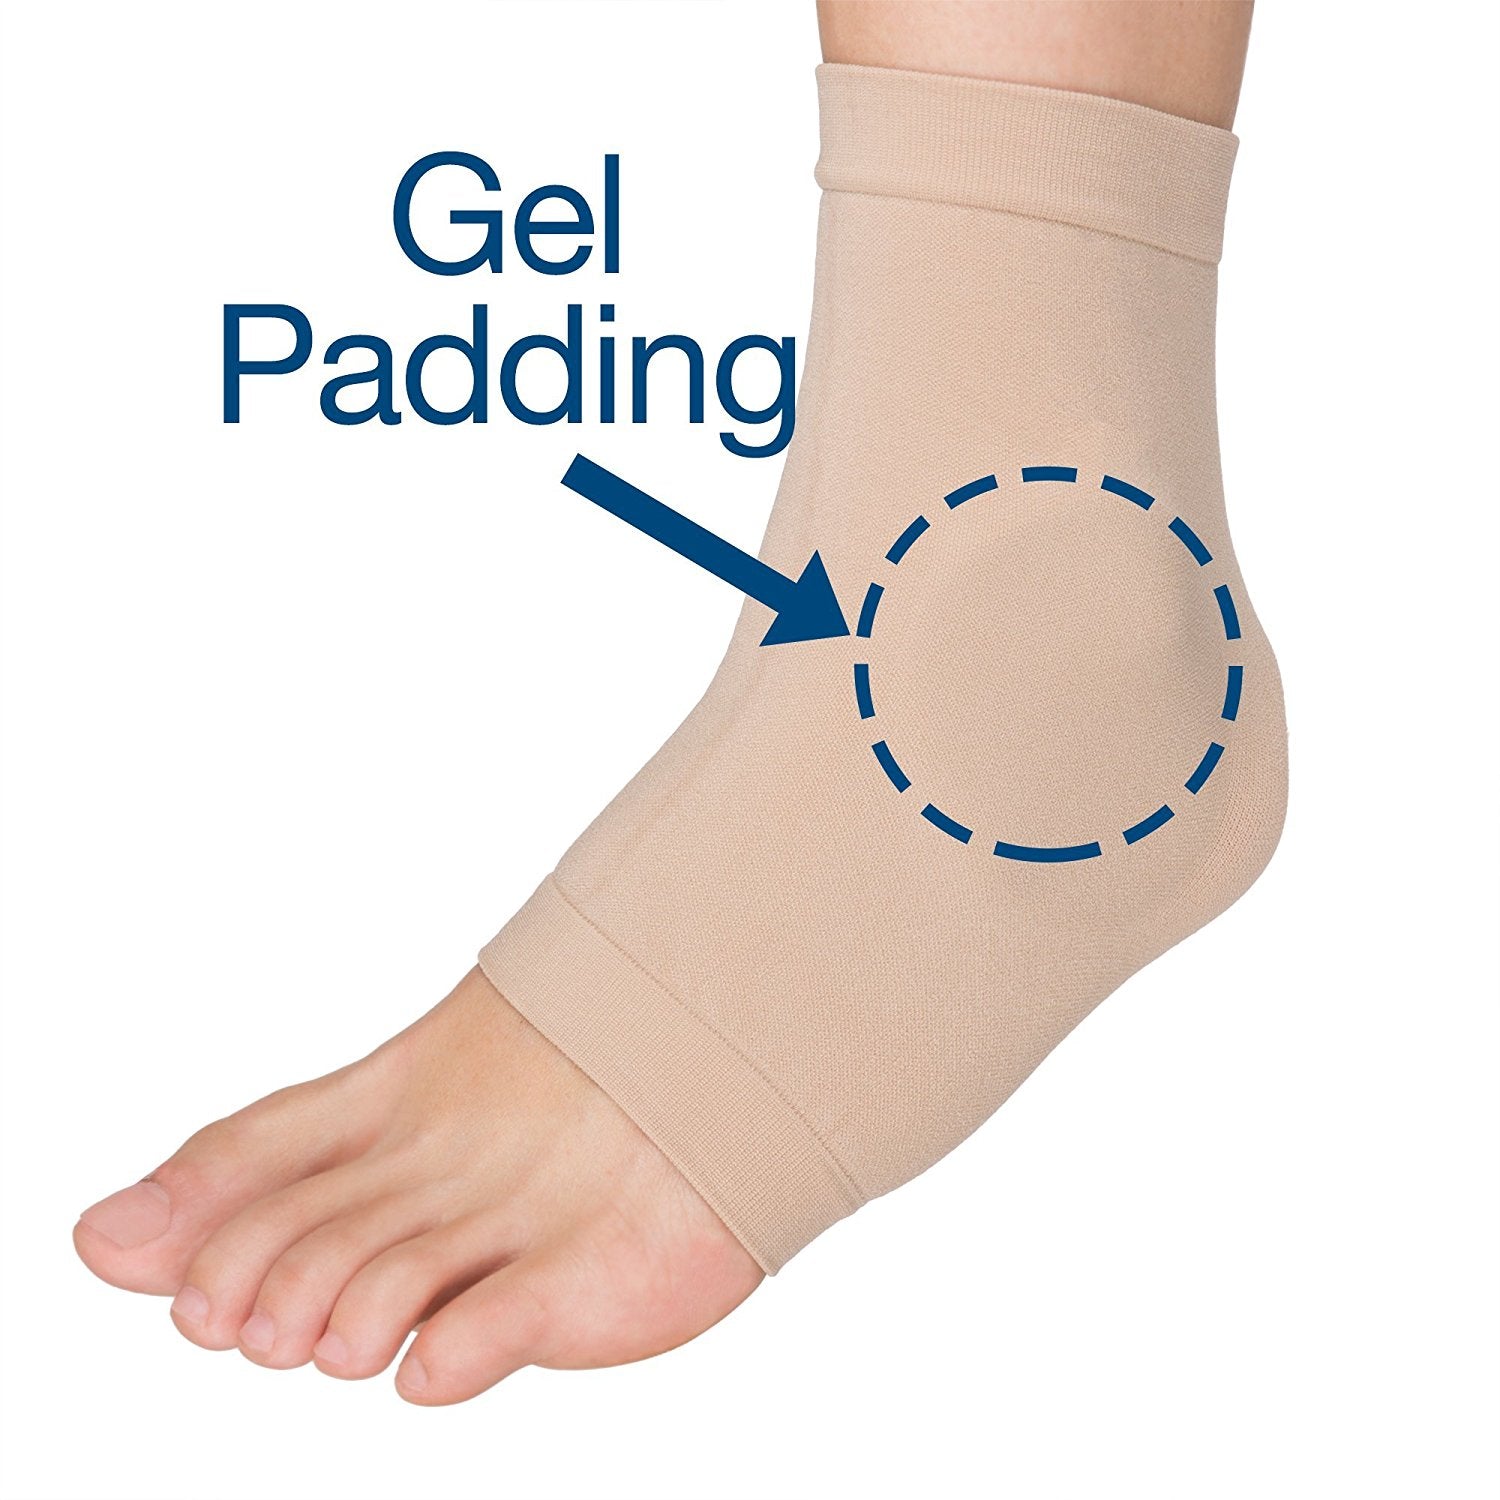 Repositionable Gel Pads for Ball of Foot - 2 Pairs